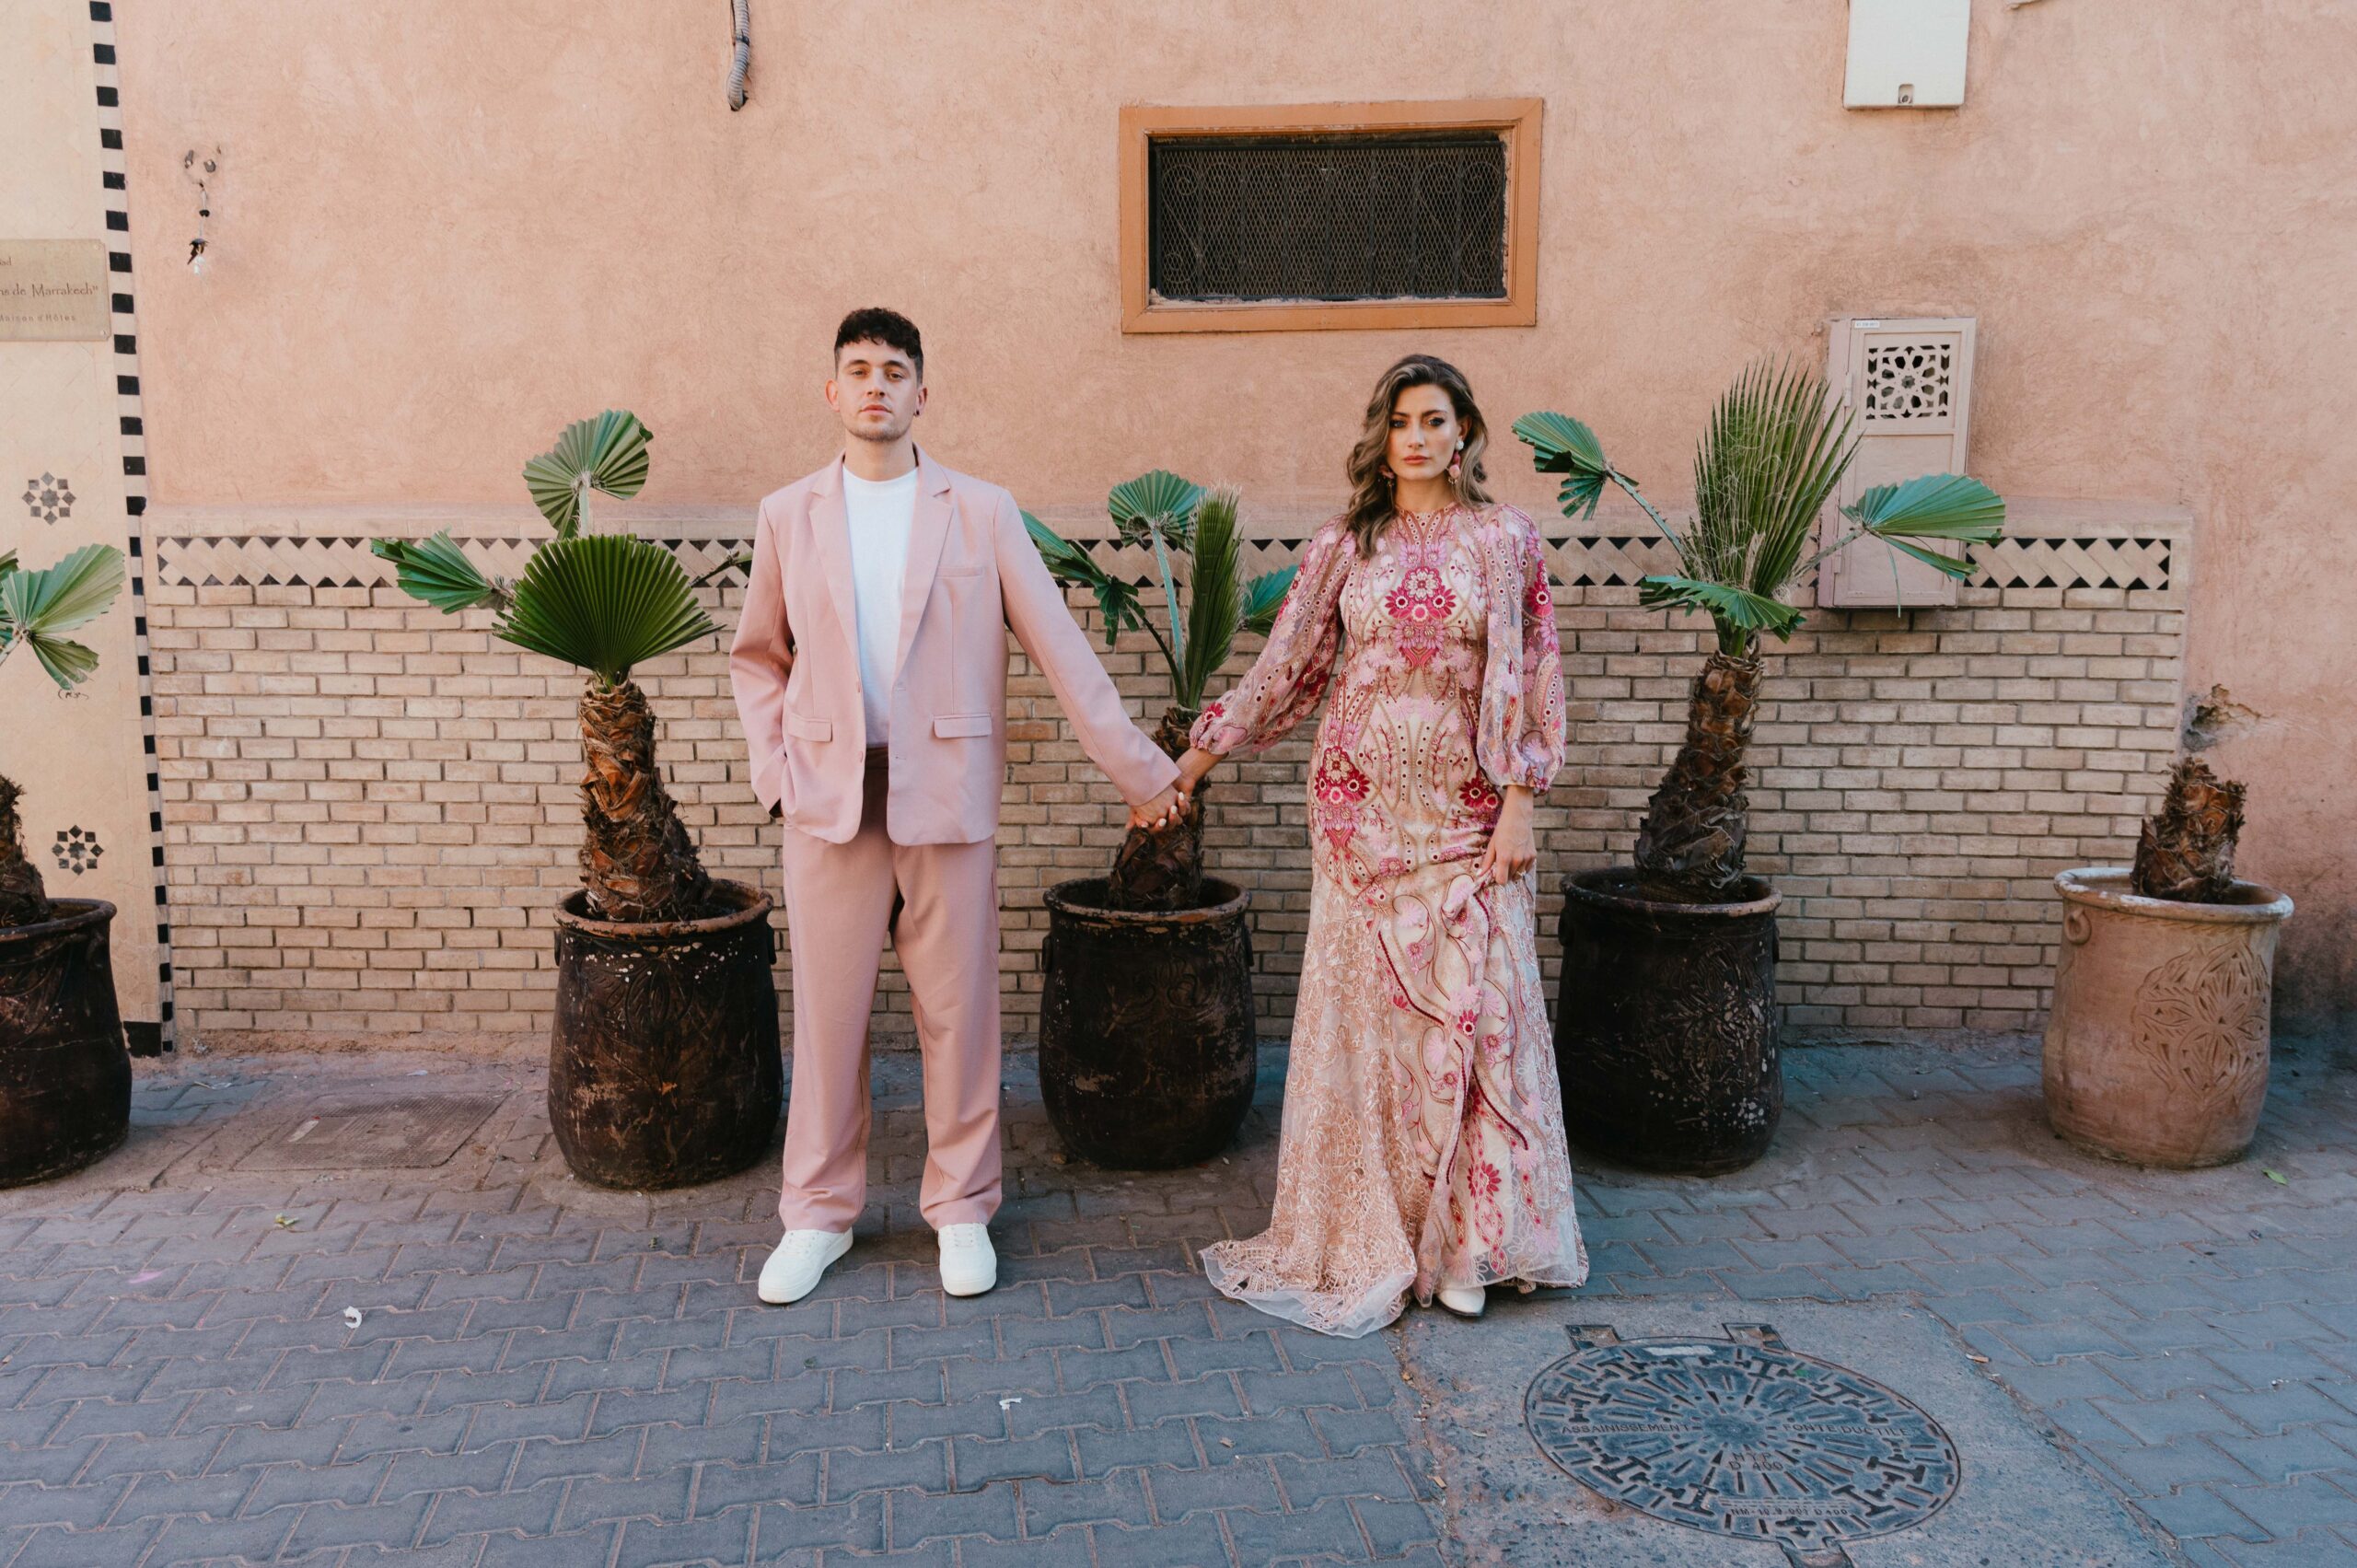 Lisa and paul in wedding attire standing in a street in the Marrakech medina in front of pink wall with cactus.